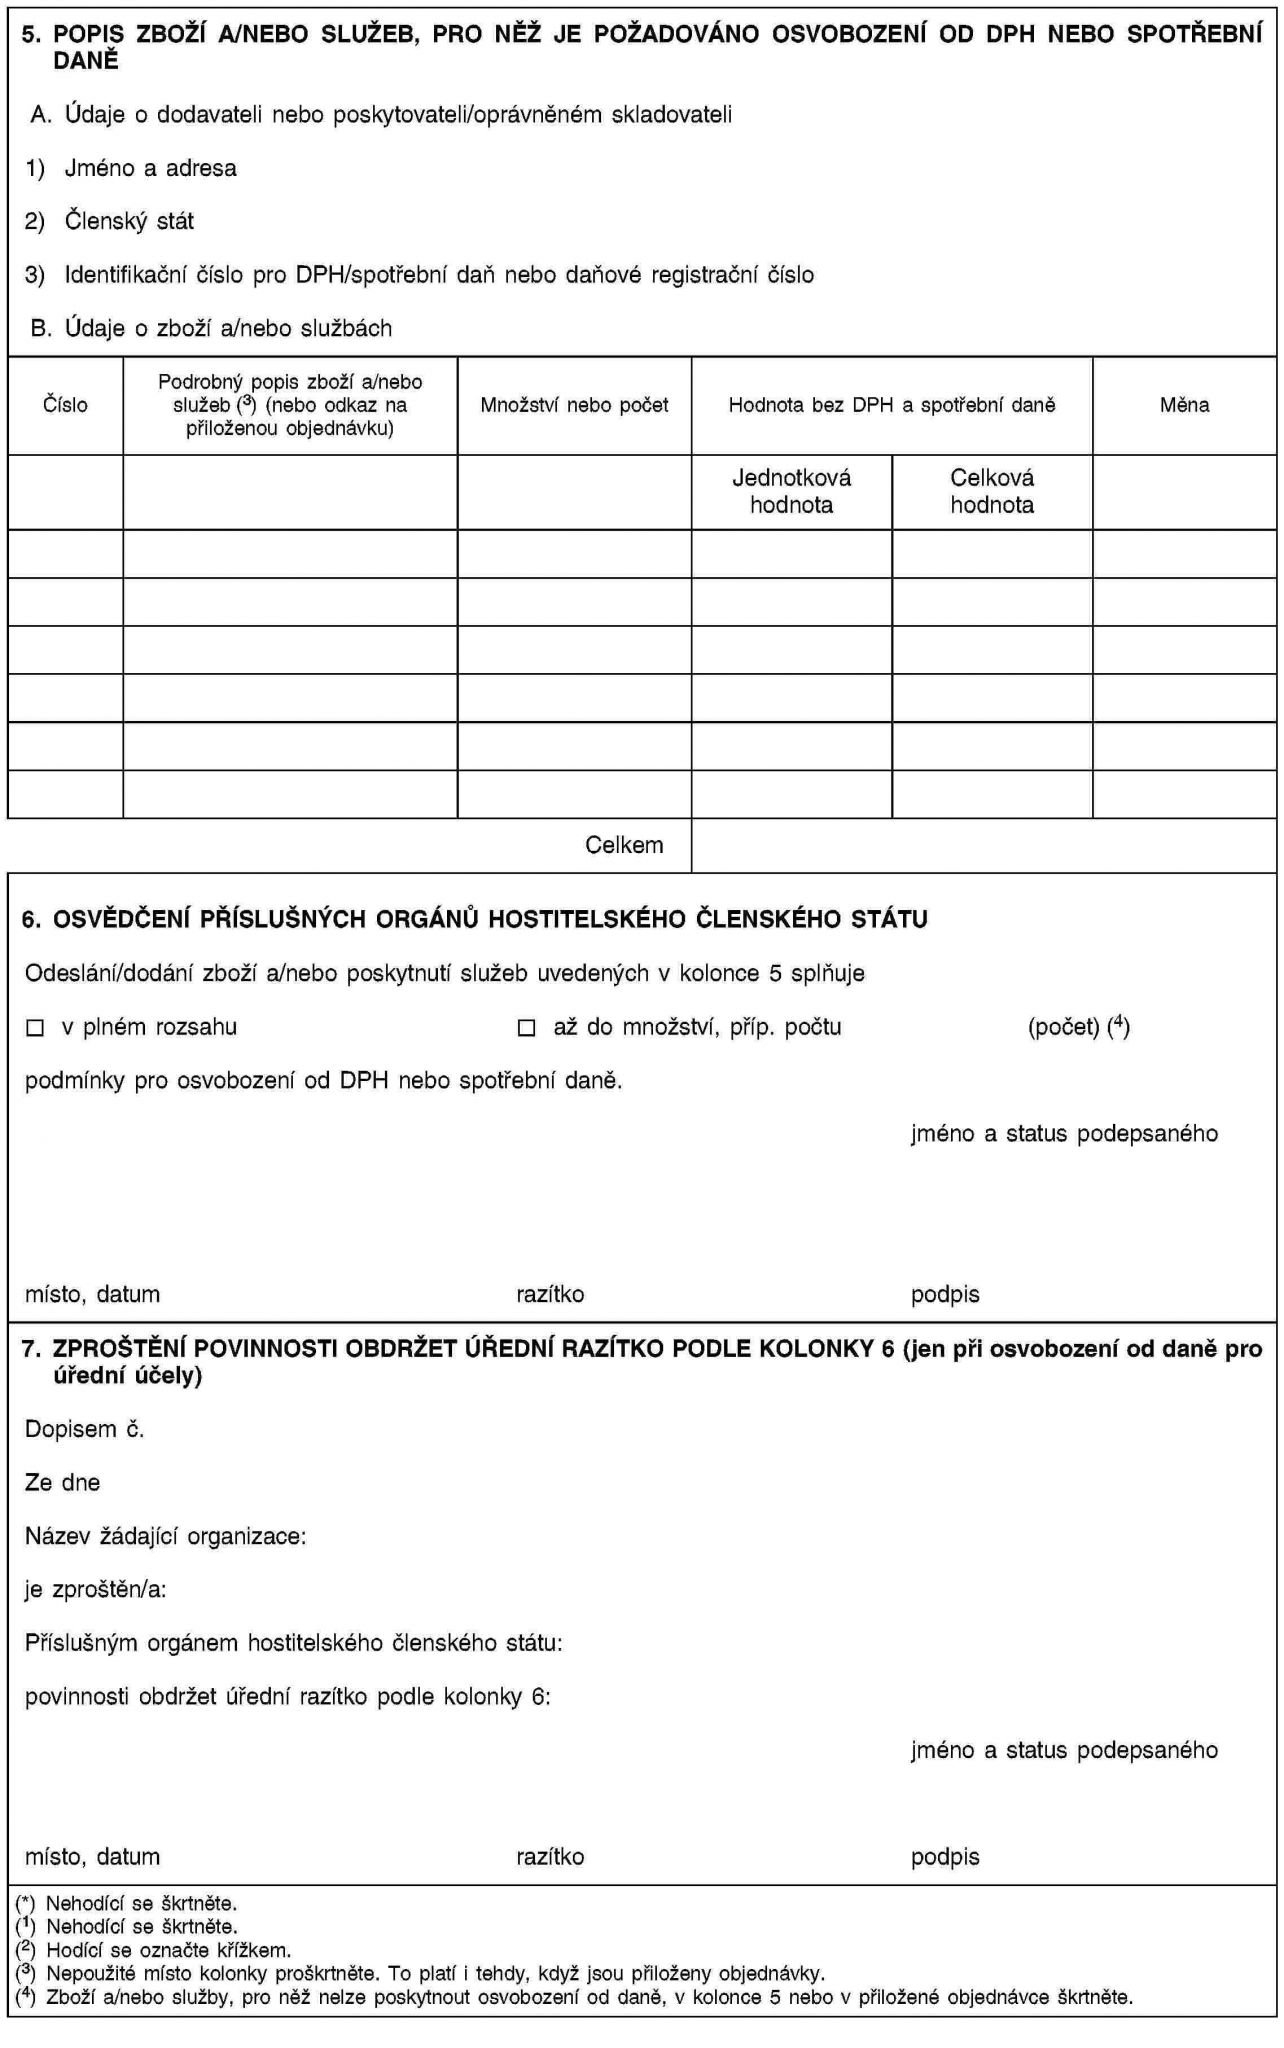 Light Refraction And Lenses Physics Classroom Worksheet Answers As Well As Light And Color Worksheet Answers Physics Classroom